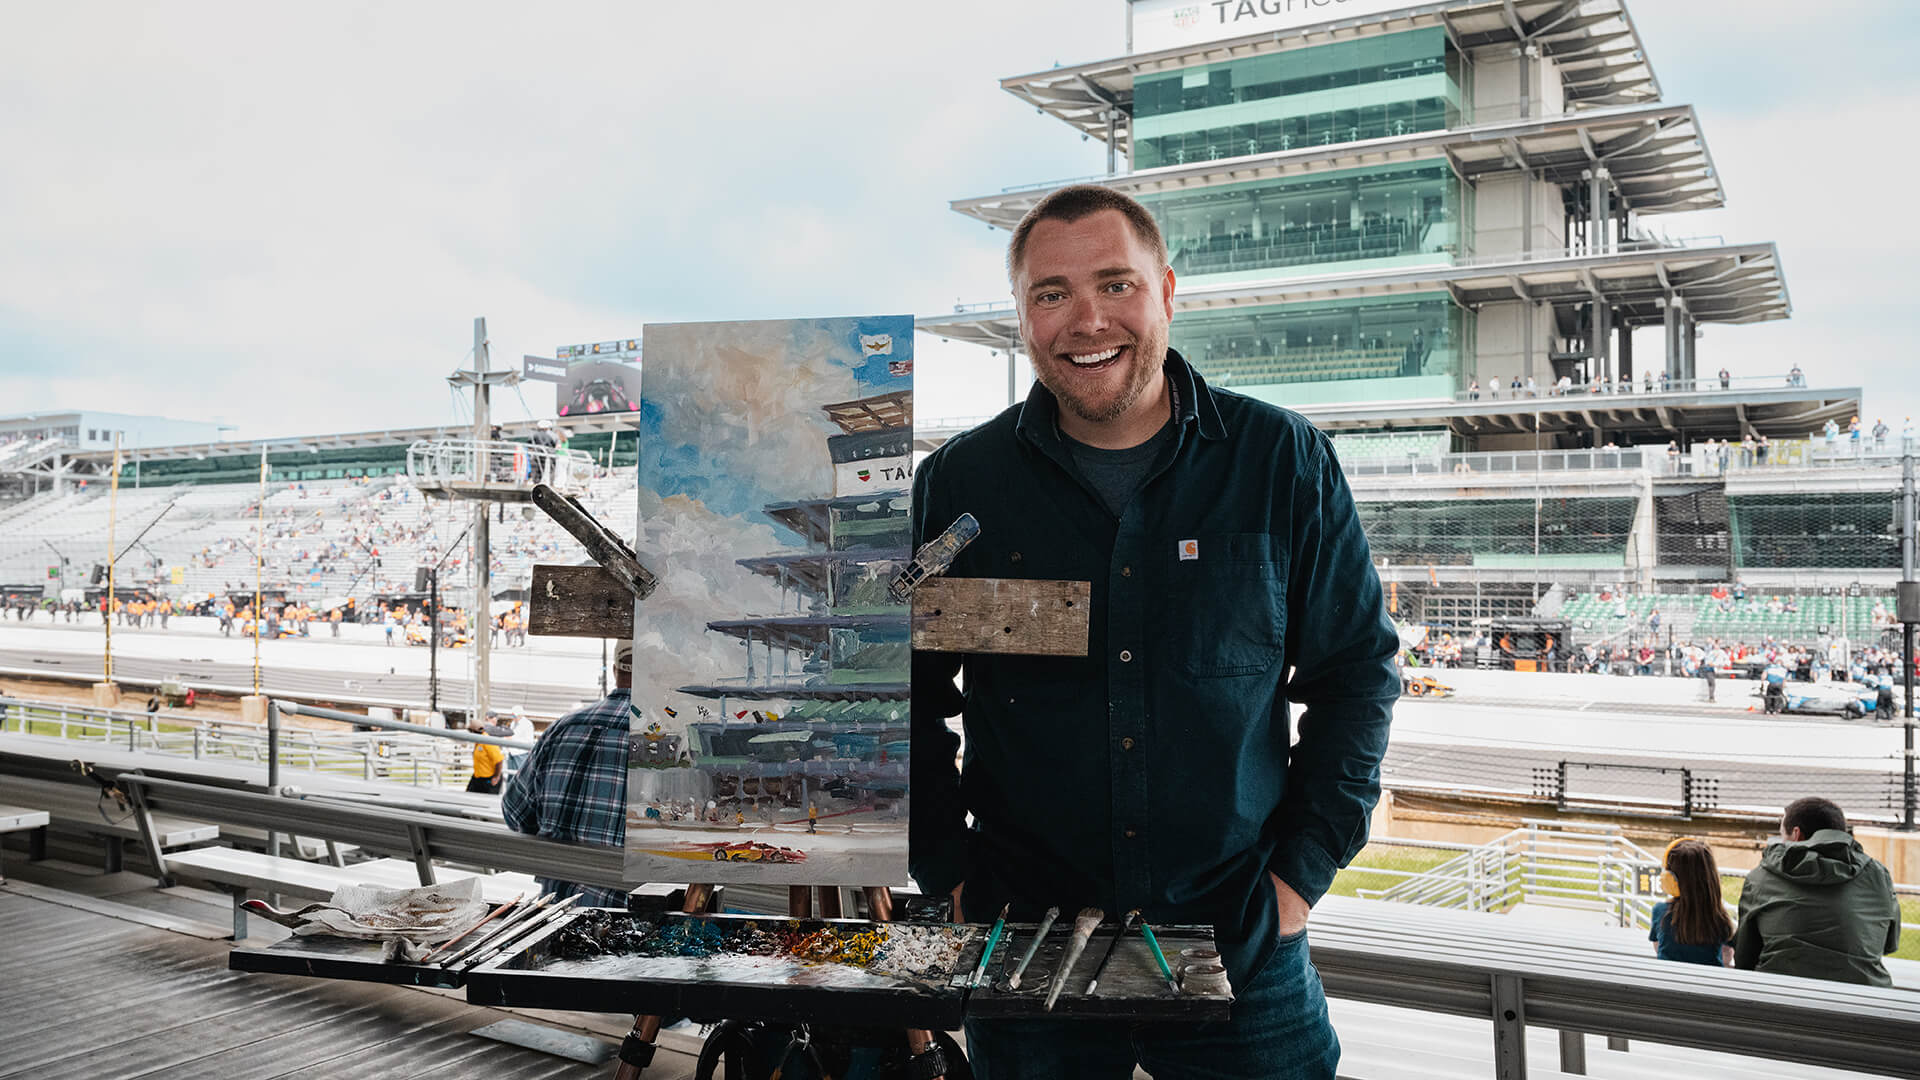 Artist Justin Vining paints at an Indy 500 practice at Indianapolis Motor Speedway